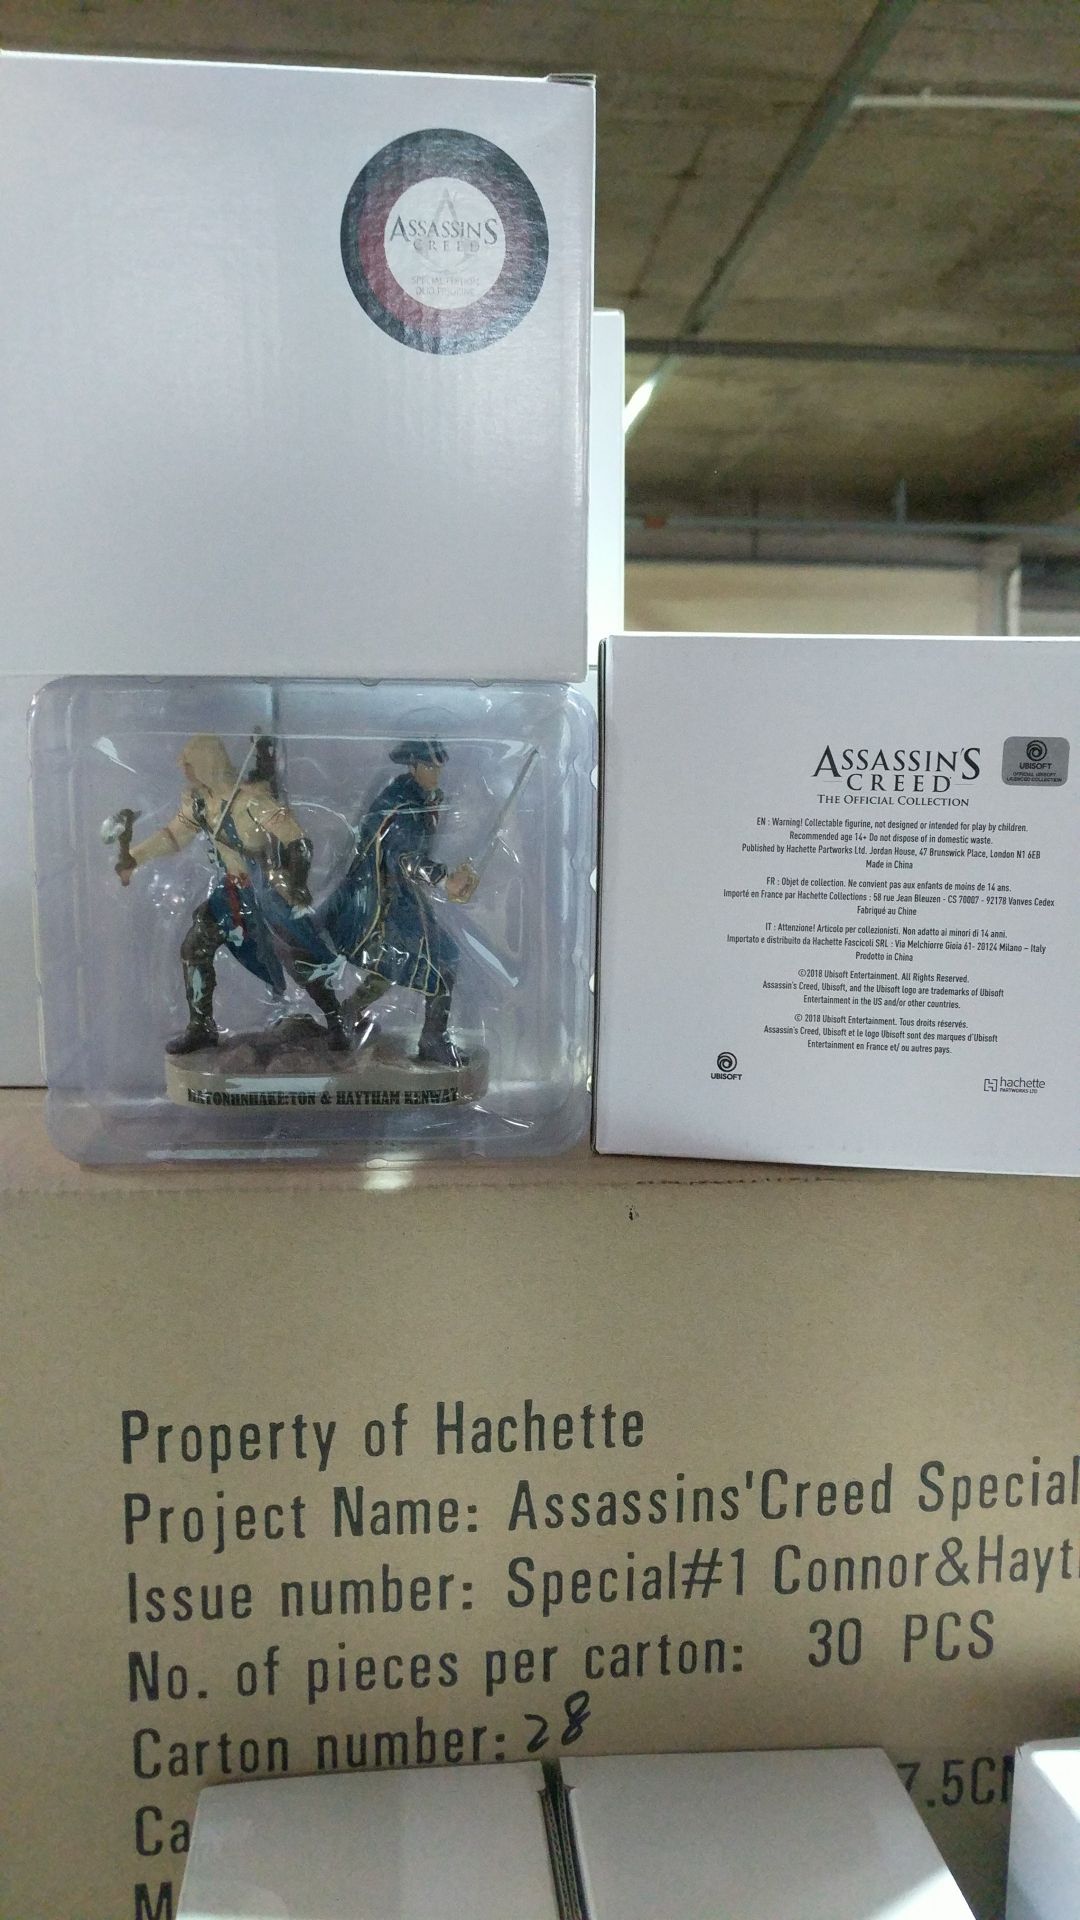 1 PALLET OF 500 NEW AND BOXED ASSASSINS CREED TWIN SET FIGURINES, COLLECTORS ITEM *PLUS VAT* - Image 3 of 3